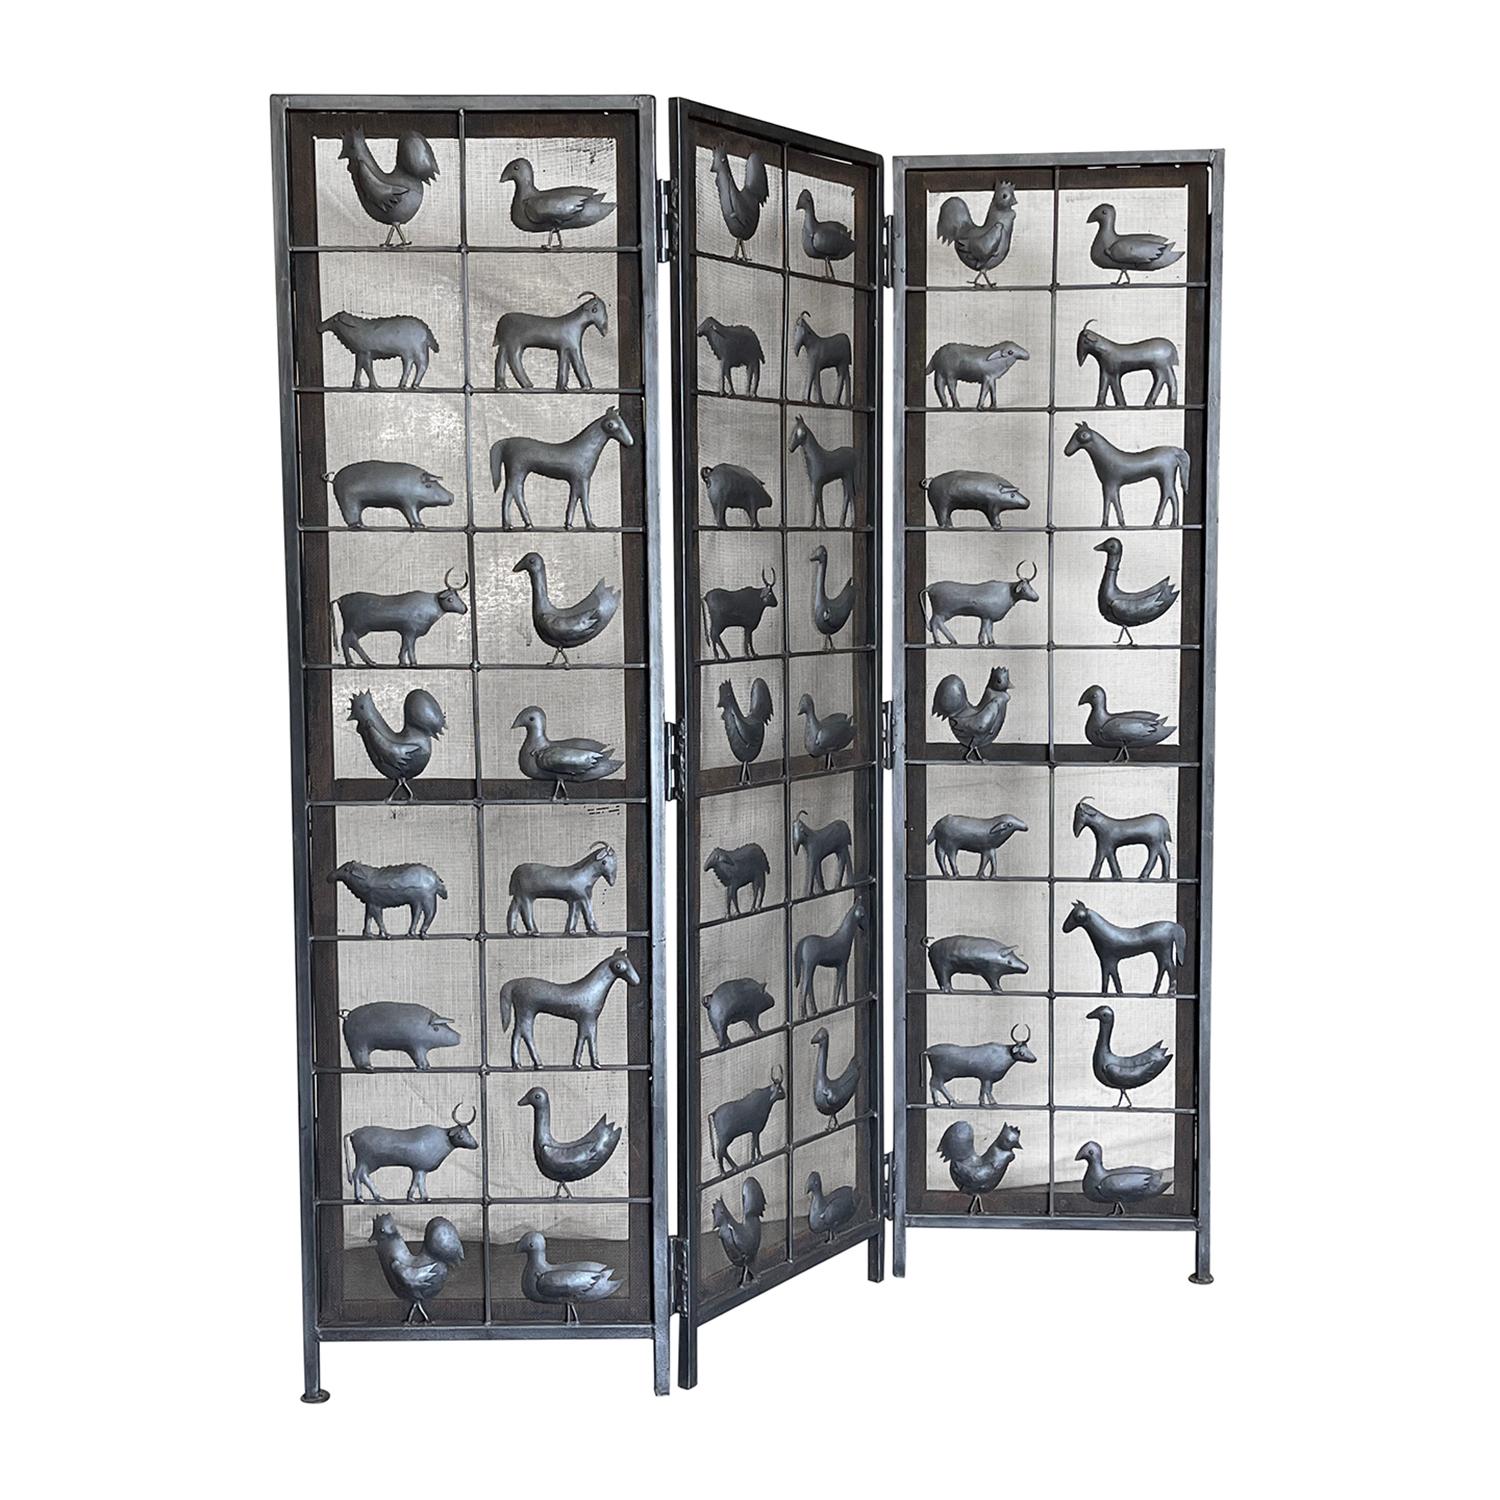 A vintage Mid-Century modern French room diver made of hand crafted wrought iron designed by Jean Touret and produced by Atelier de Marolles, in good condition. The detailed Brutalist style screen is composed with three adjustable panels, each of